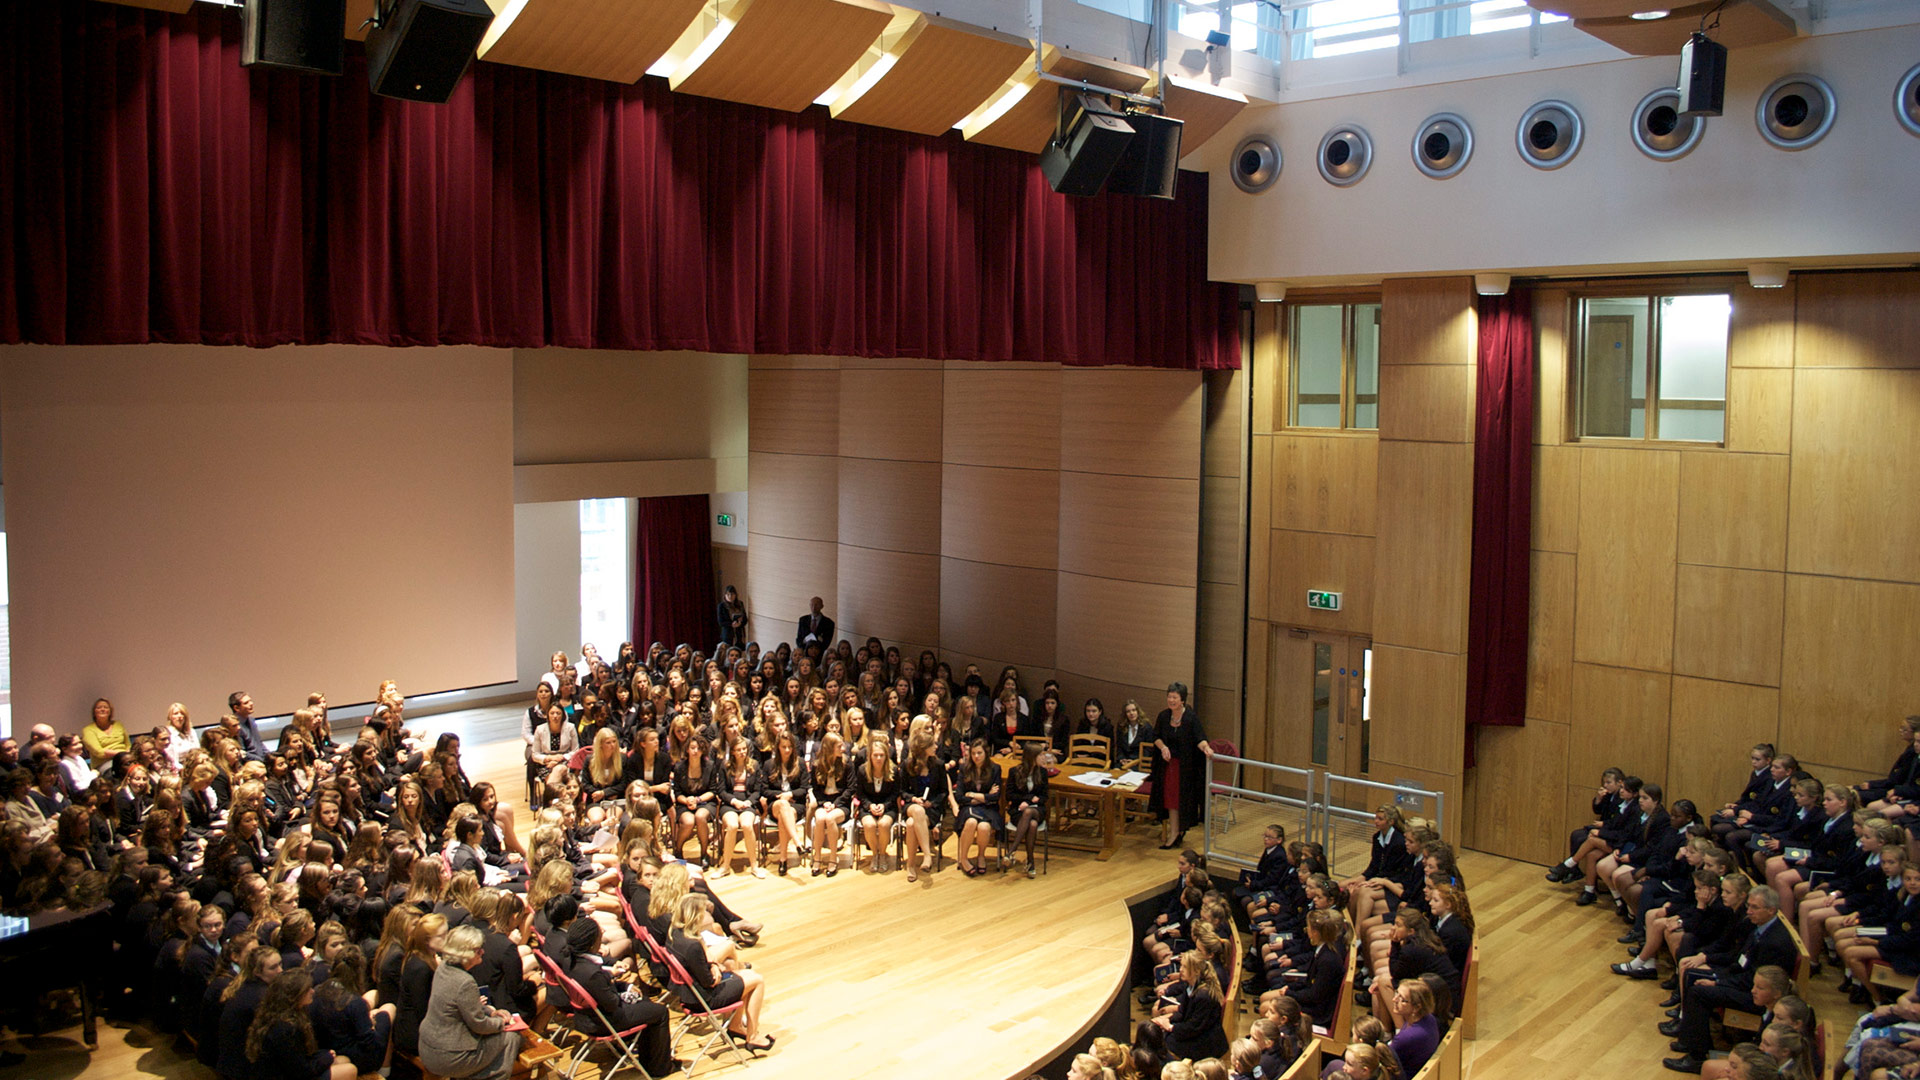 St Catherine's School, Sports & Performing Arts Centre